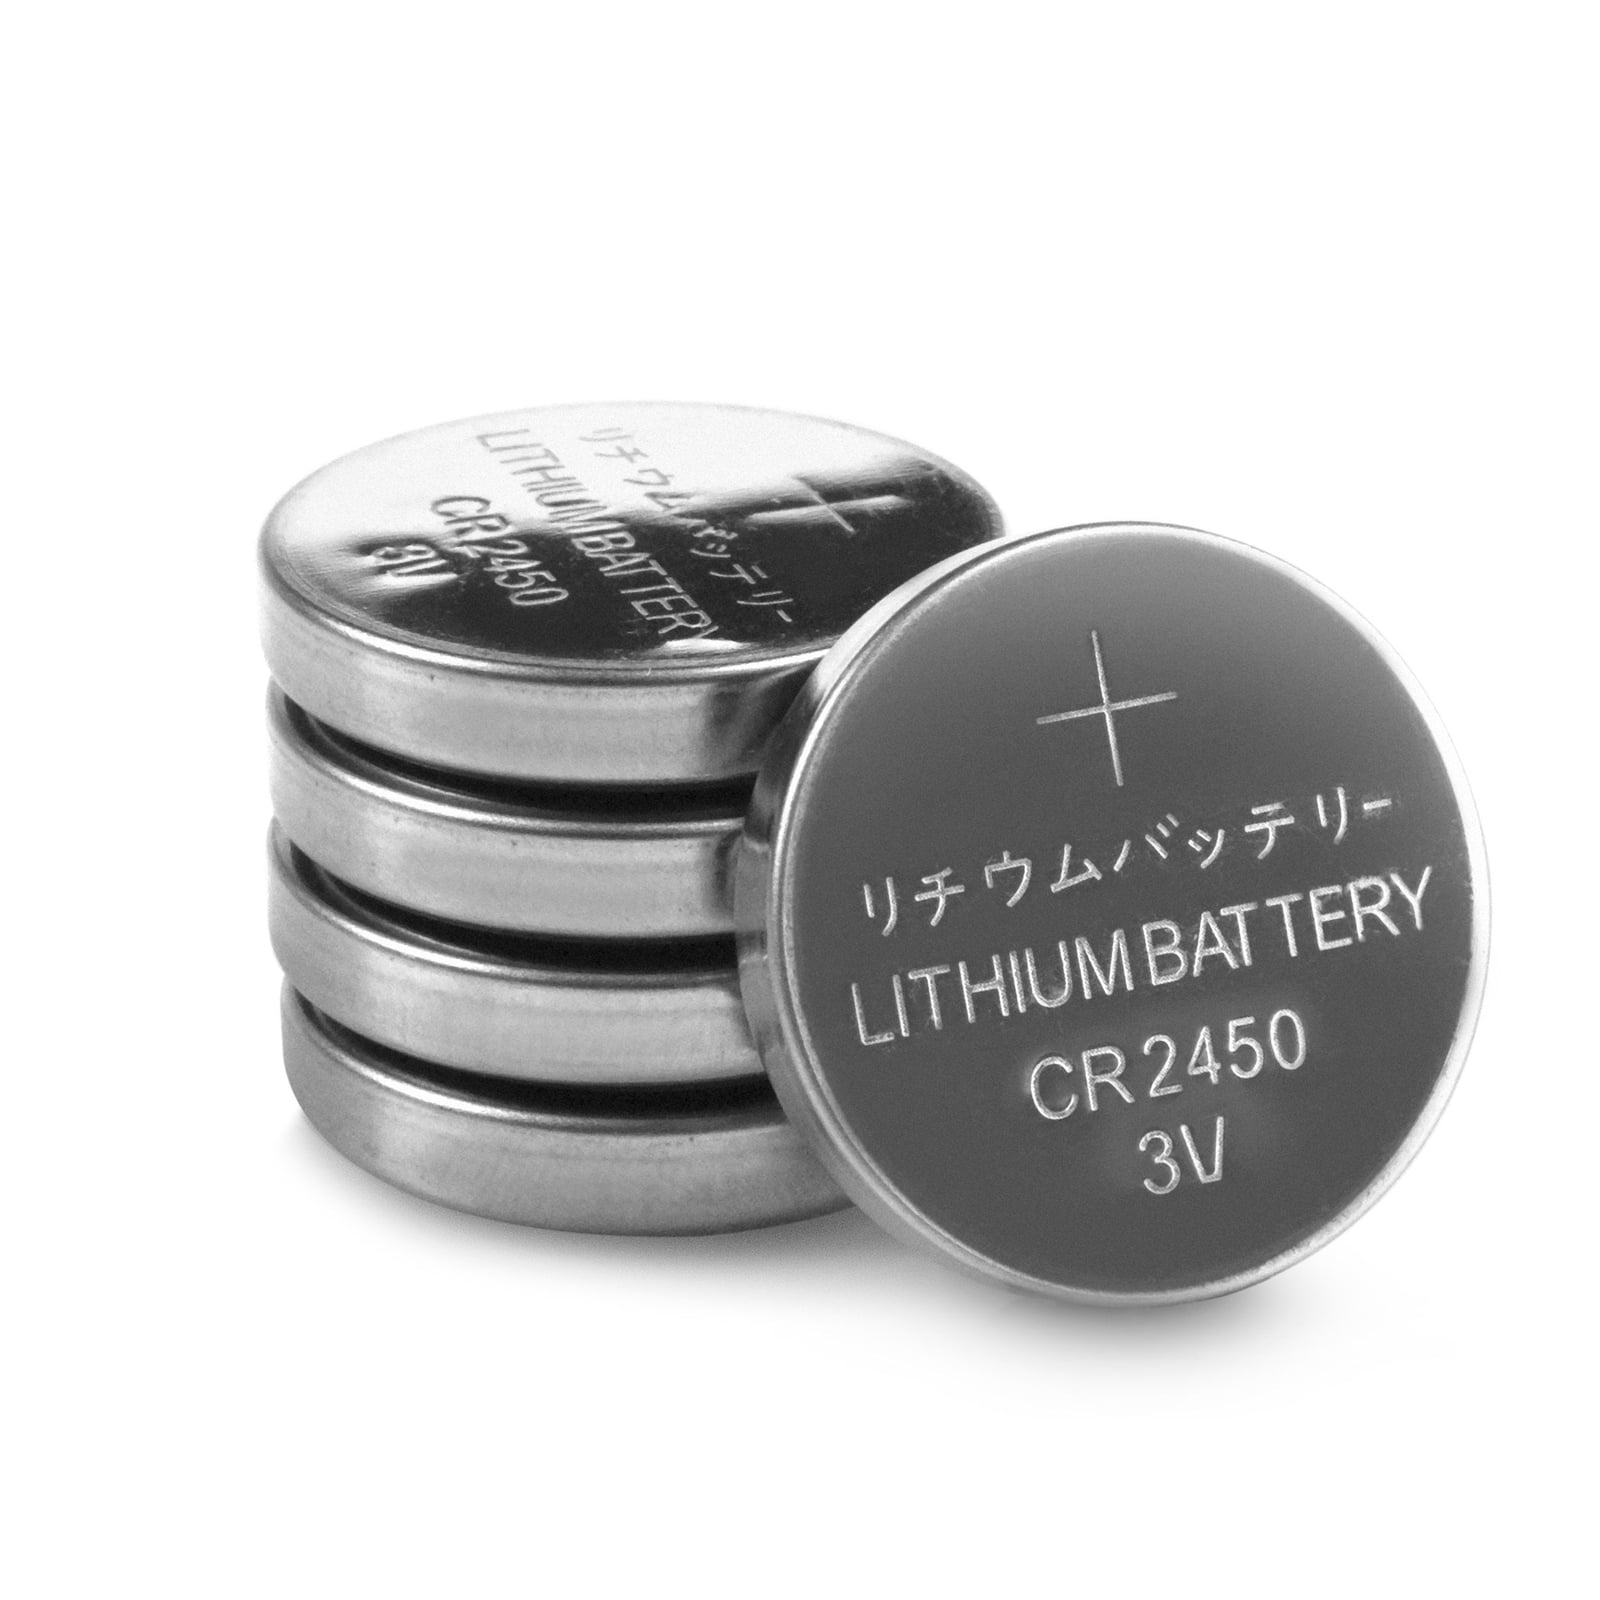 Maxell CR2450 Lithium Battery 3V Coin Cell – QuartzComponents